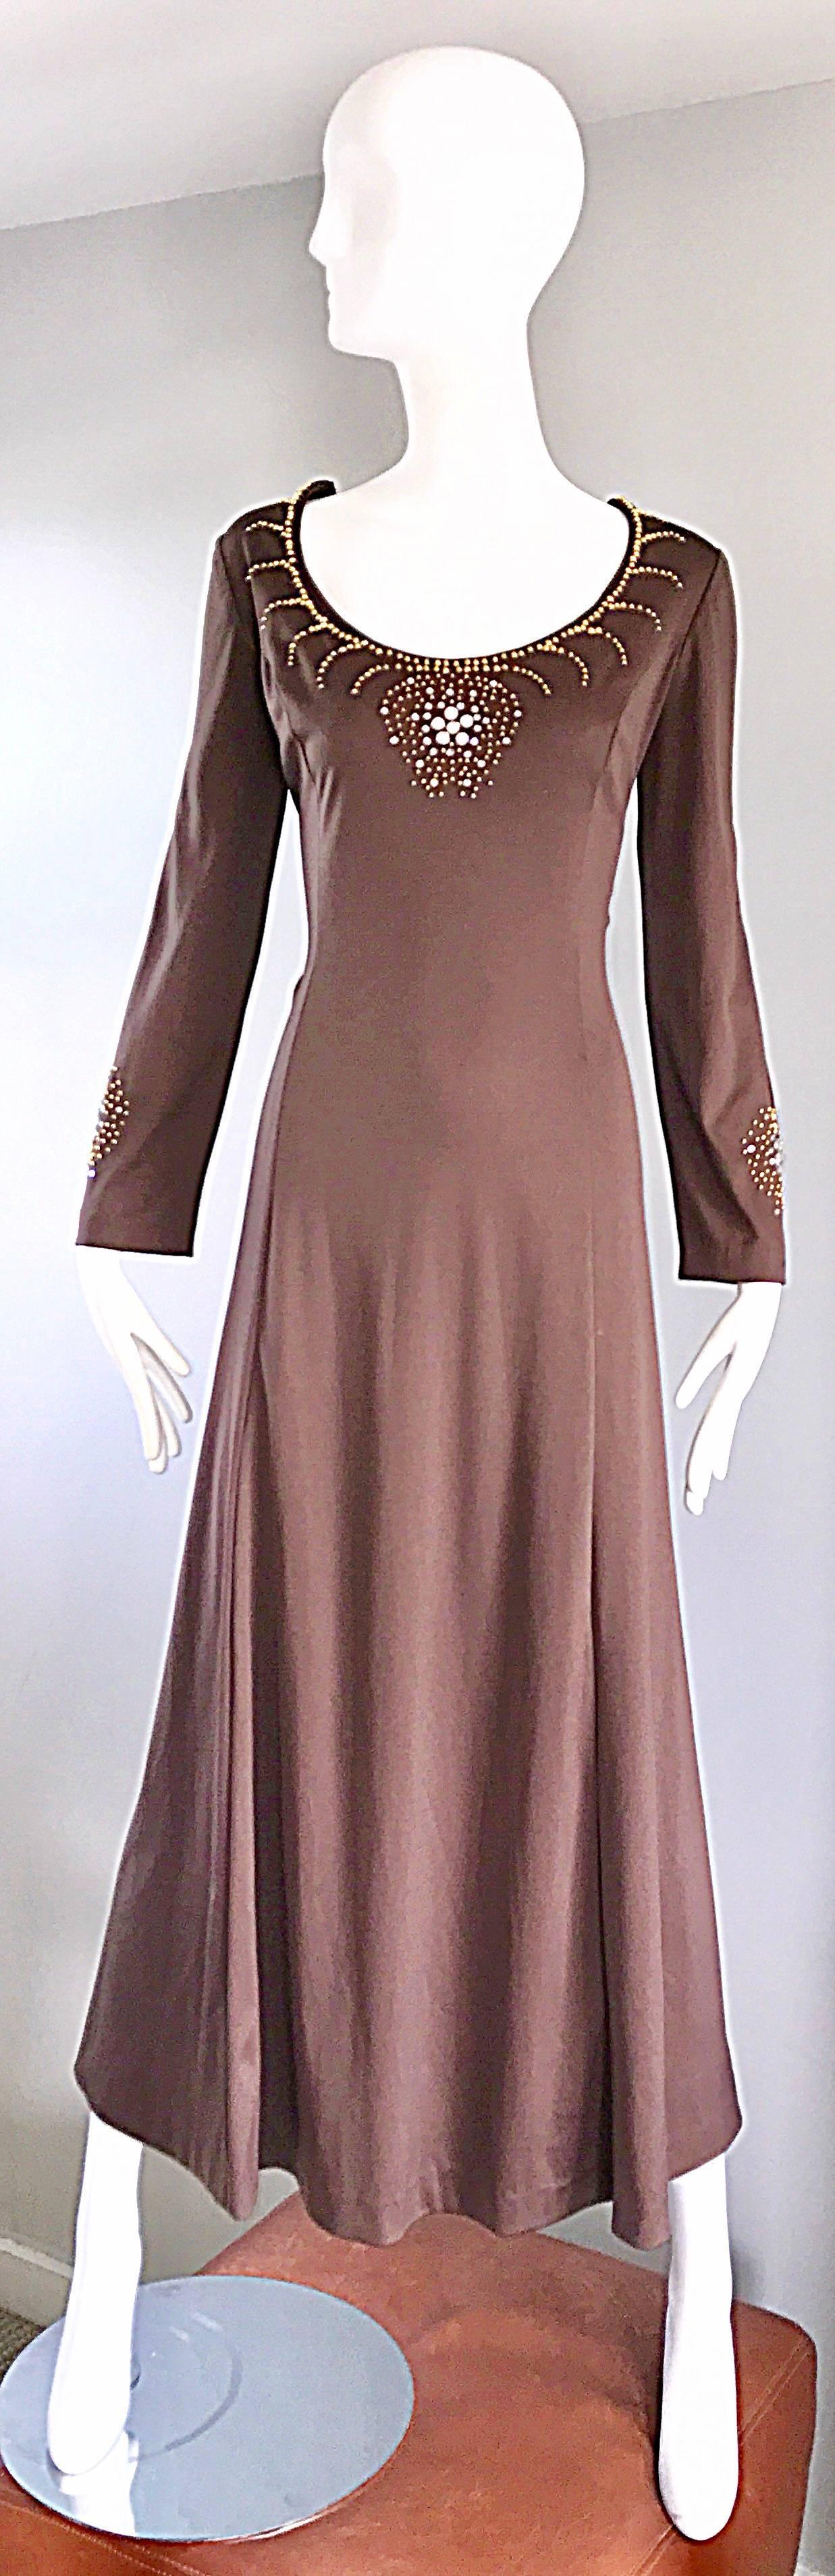 Gorgeous vintage 1970s light brown / coffee jersey long sleeve maxi dress! Gold beads and crystal rhinestones adorn the bust and bottom of each sleeve. Hidden metal zipper up the back with hook-and-eye closure. Looks amazing on, and can be worn